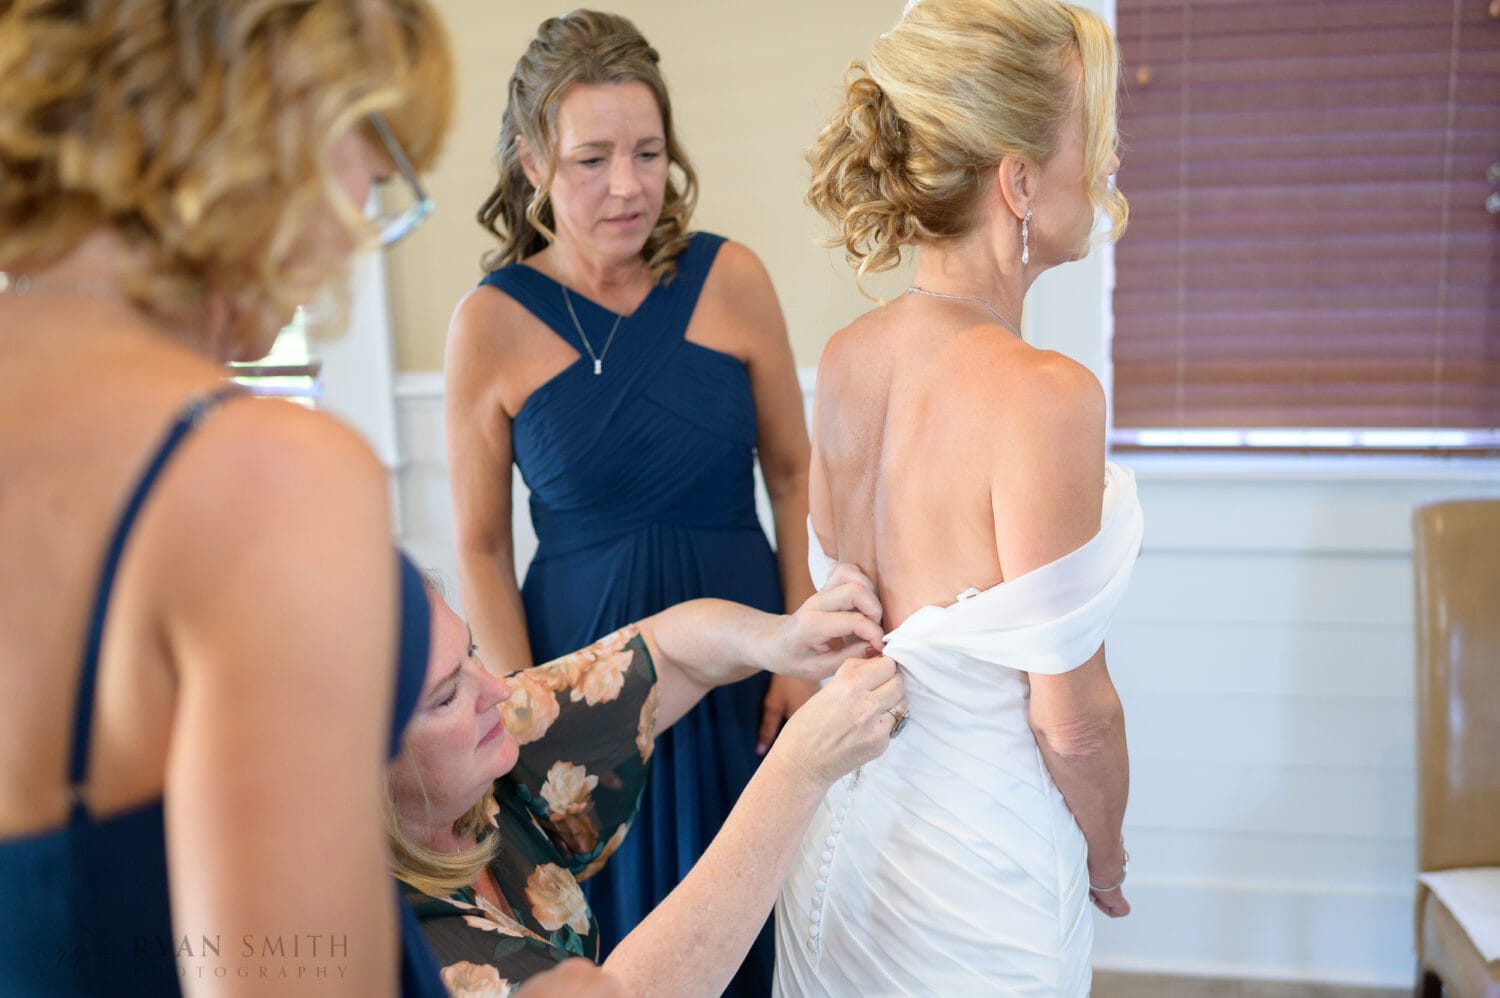 Helping bride with her dress - Safe Harbor Reserve Harbor Yacht Club